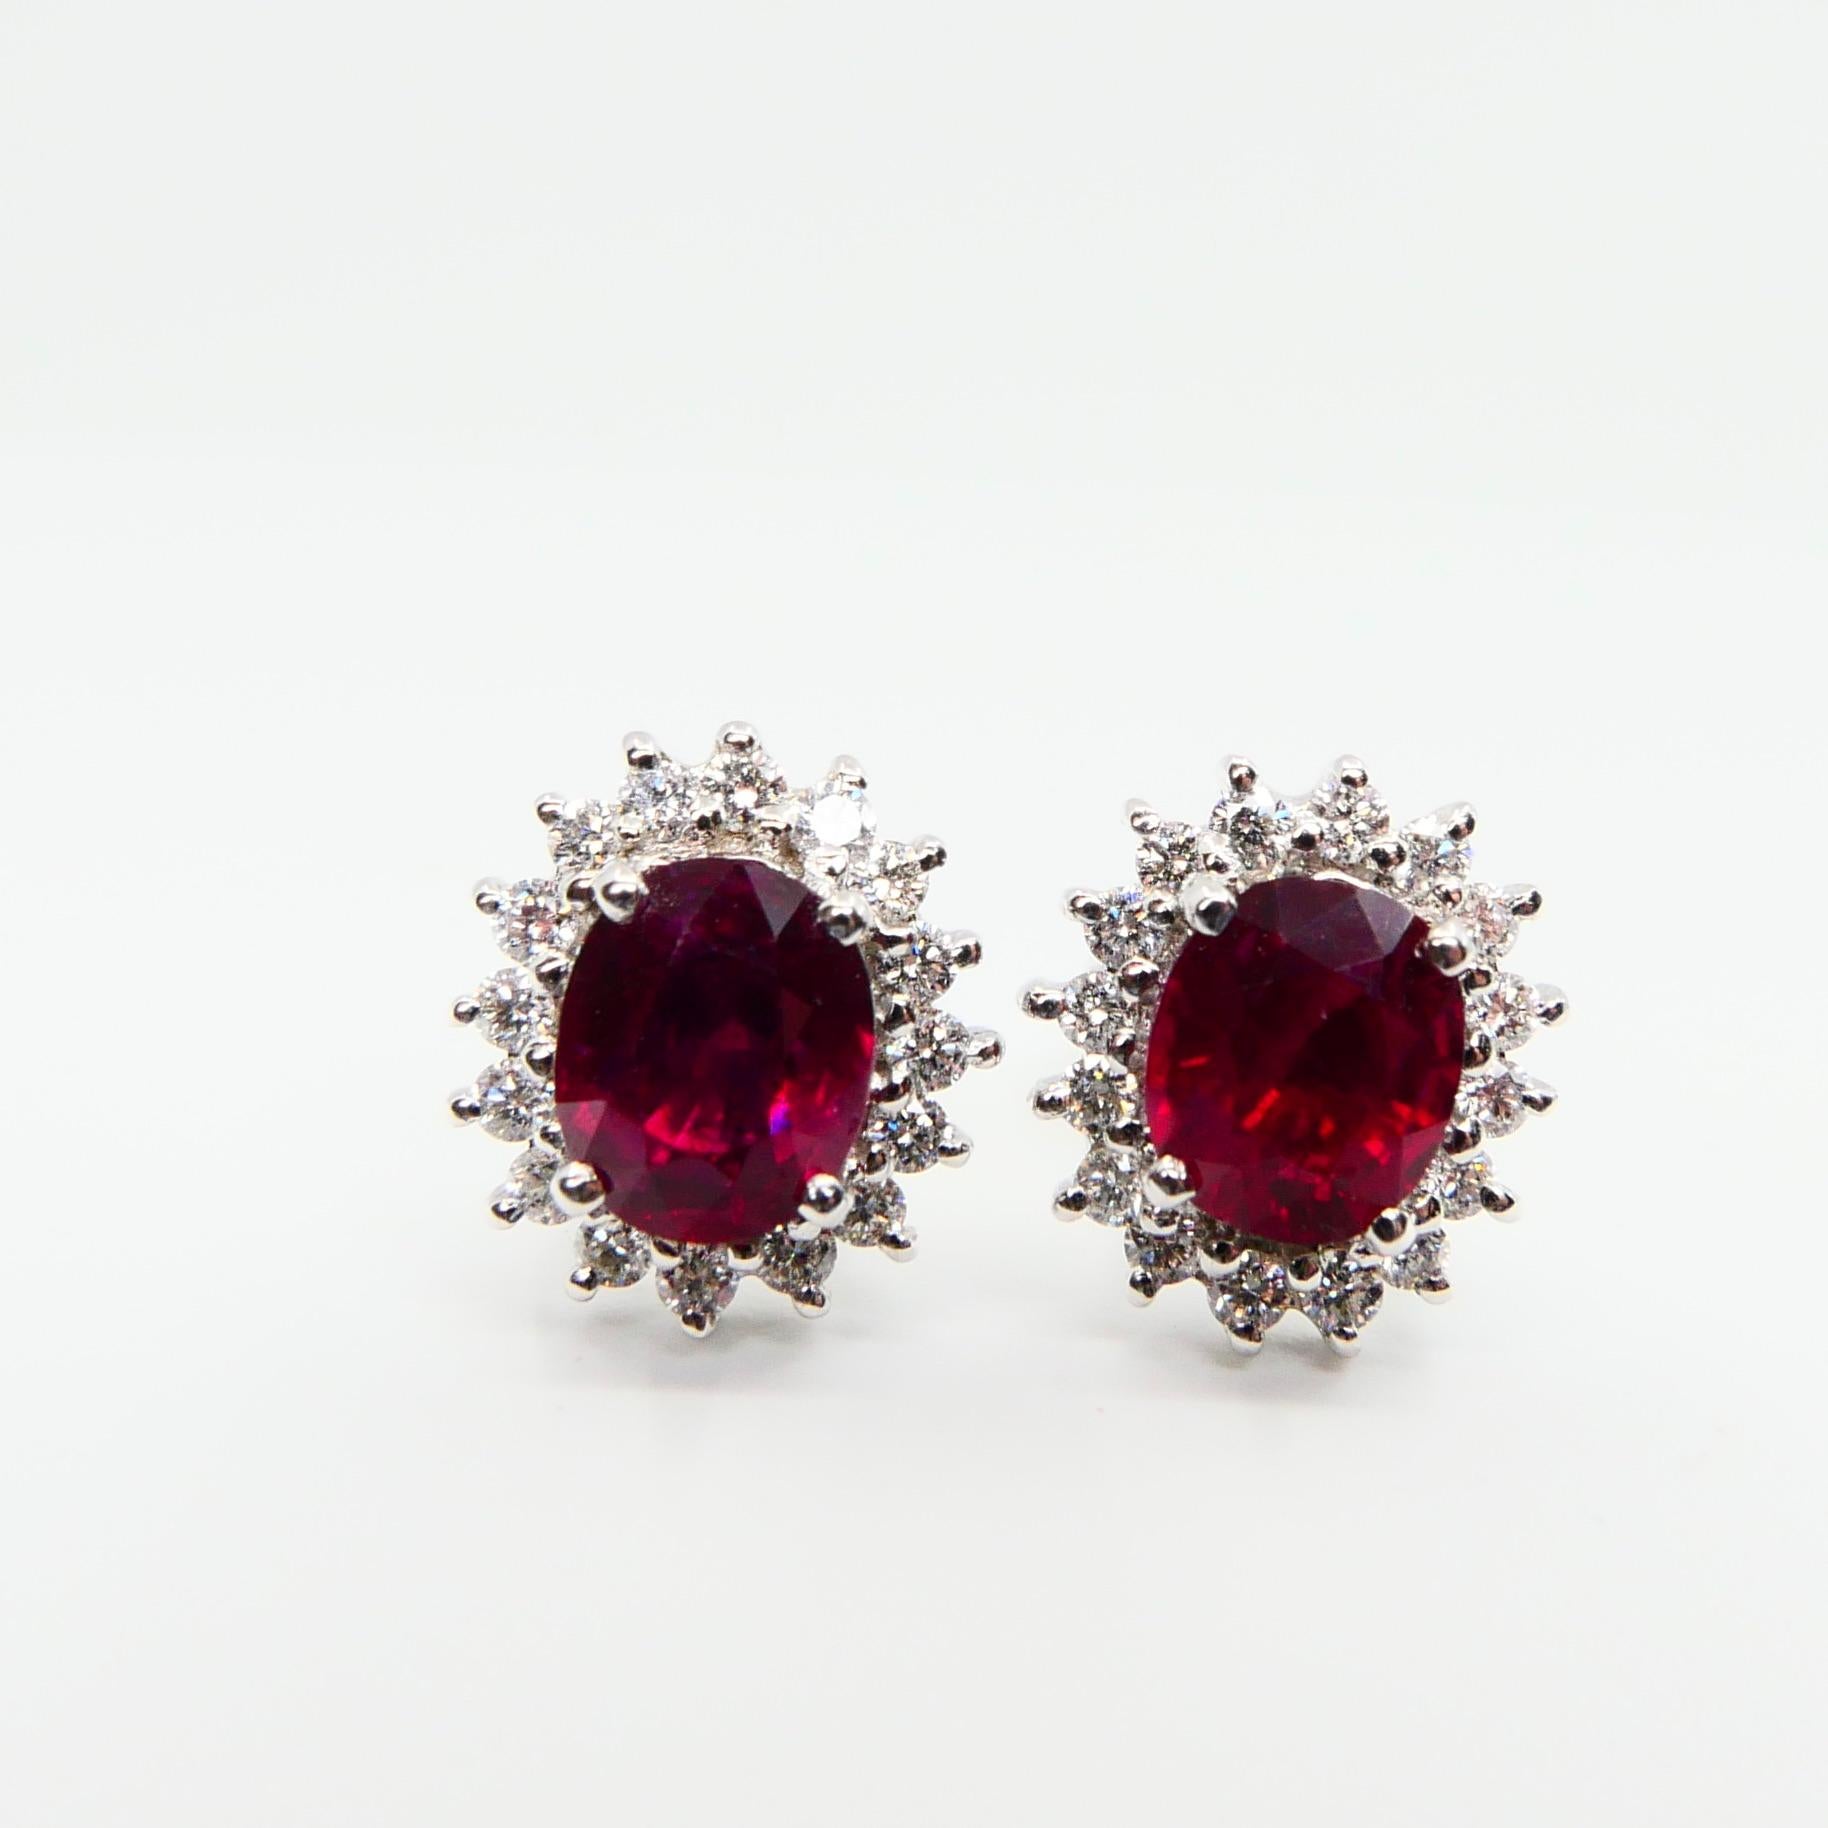 Vivid Red Ruby 2.09 Carat and Diamond Stud Earrings, Close to Pigeon Blood Red 5